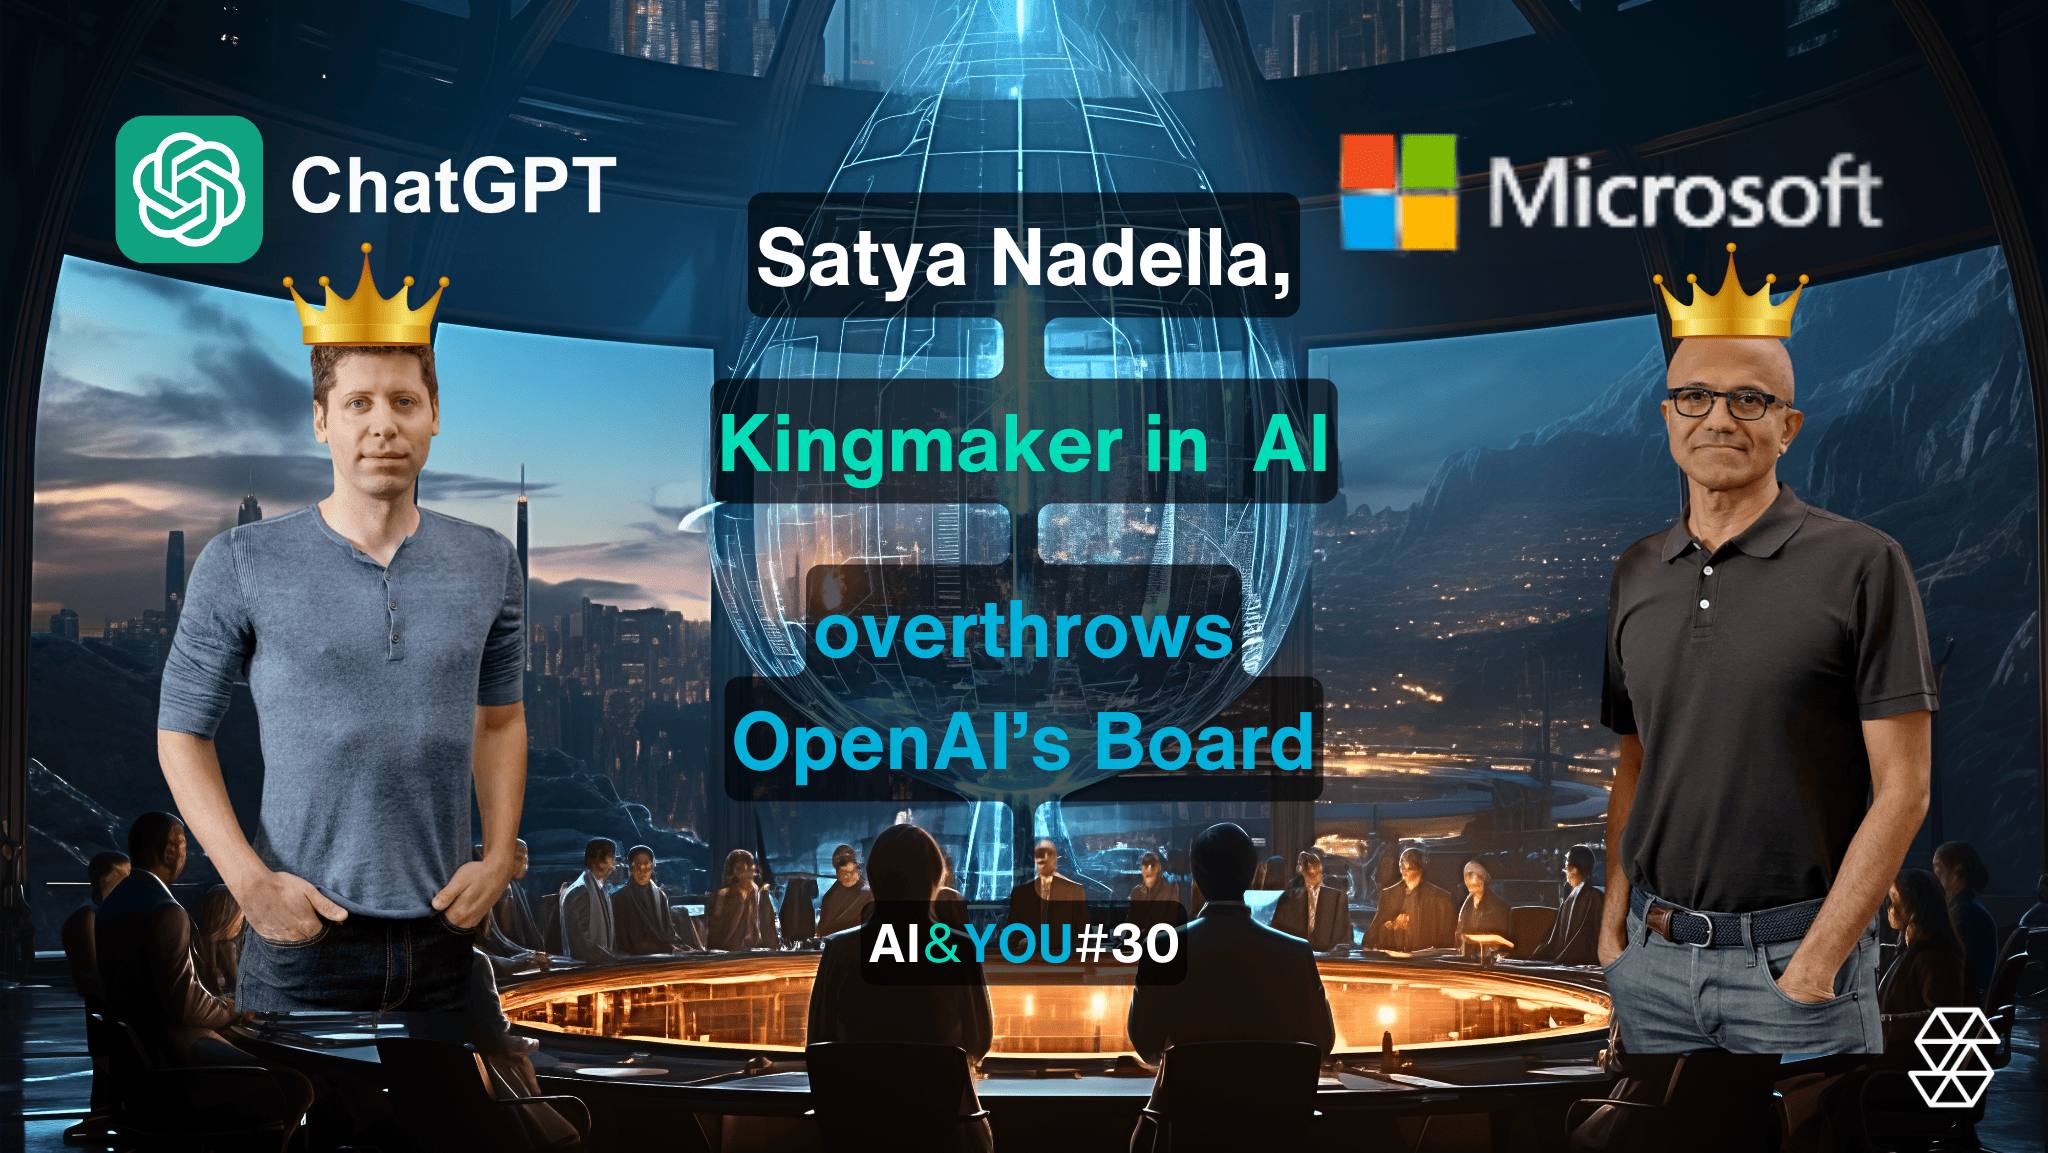 AI&YOU#30: Satya Nadella plays Kingmaker in the AI world & overthrows Open AI’s old board